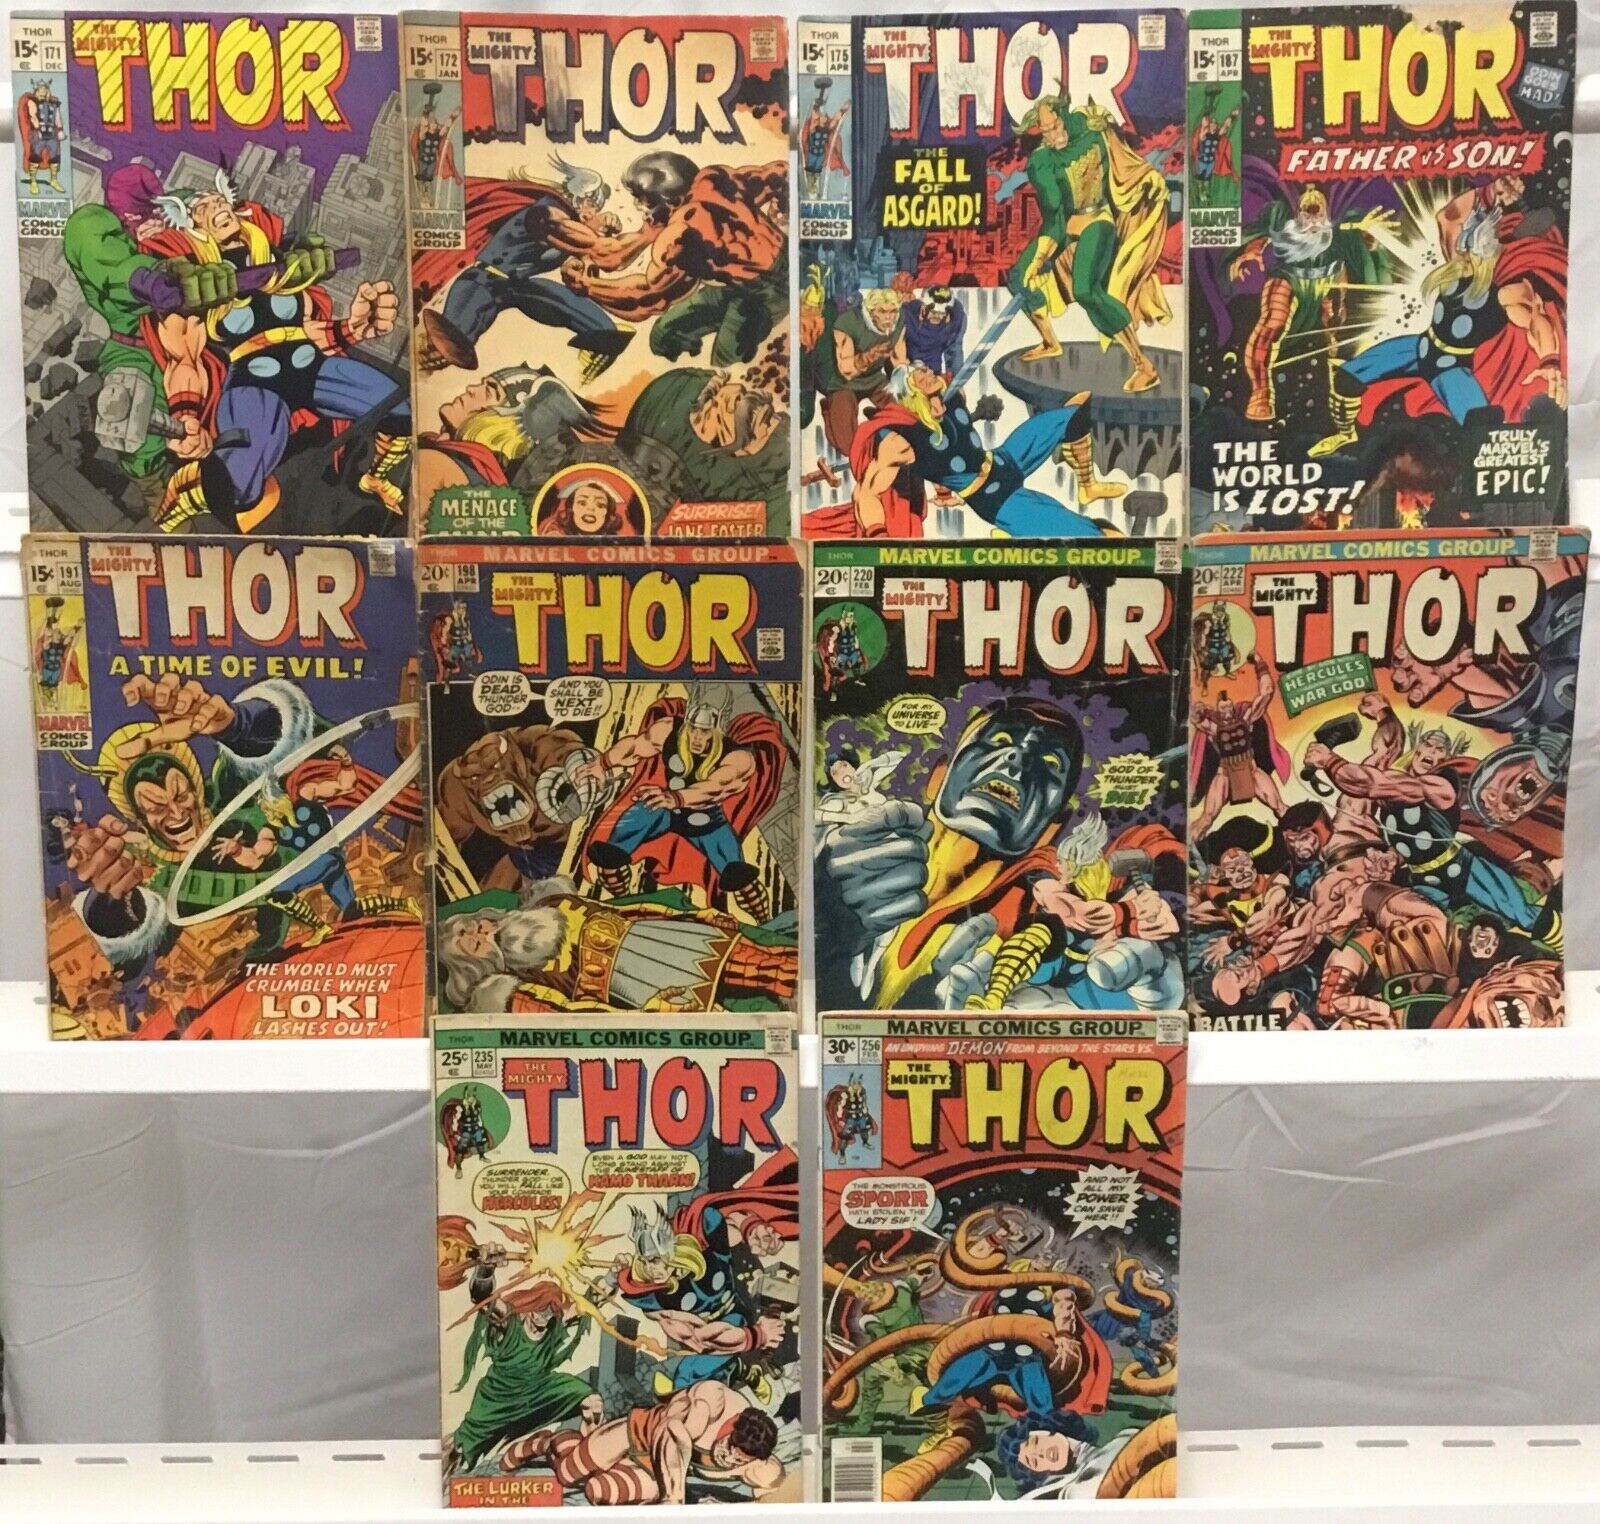 Marvel Comics Low Grade Vintage Thor Comic Book Lot of 10 Issues